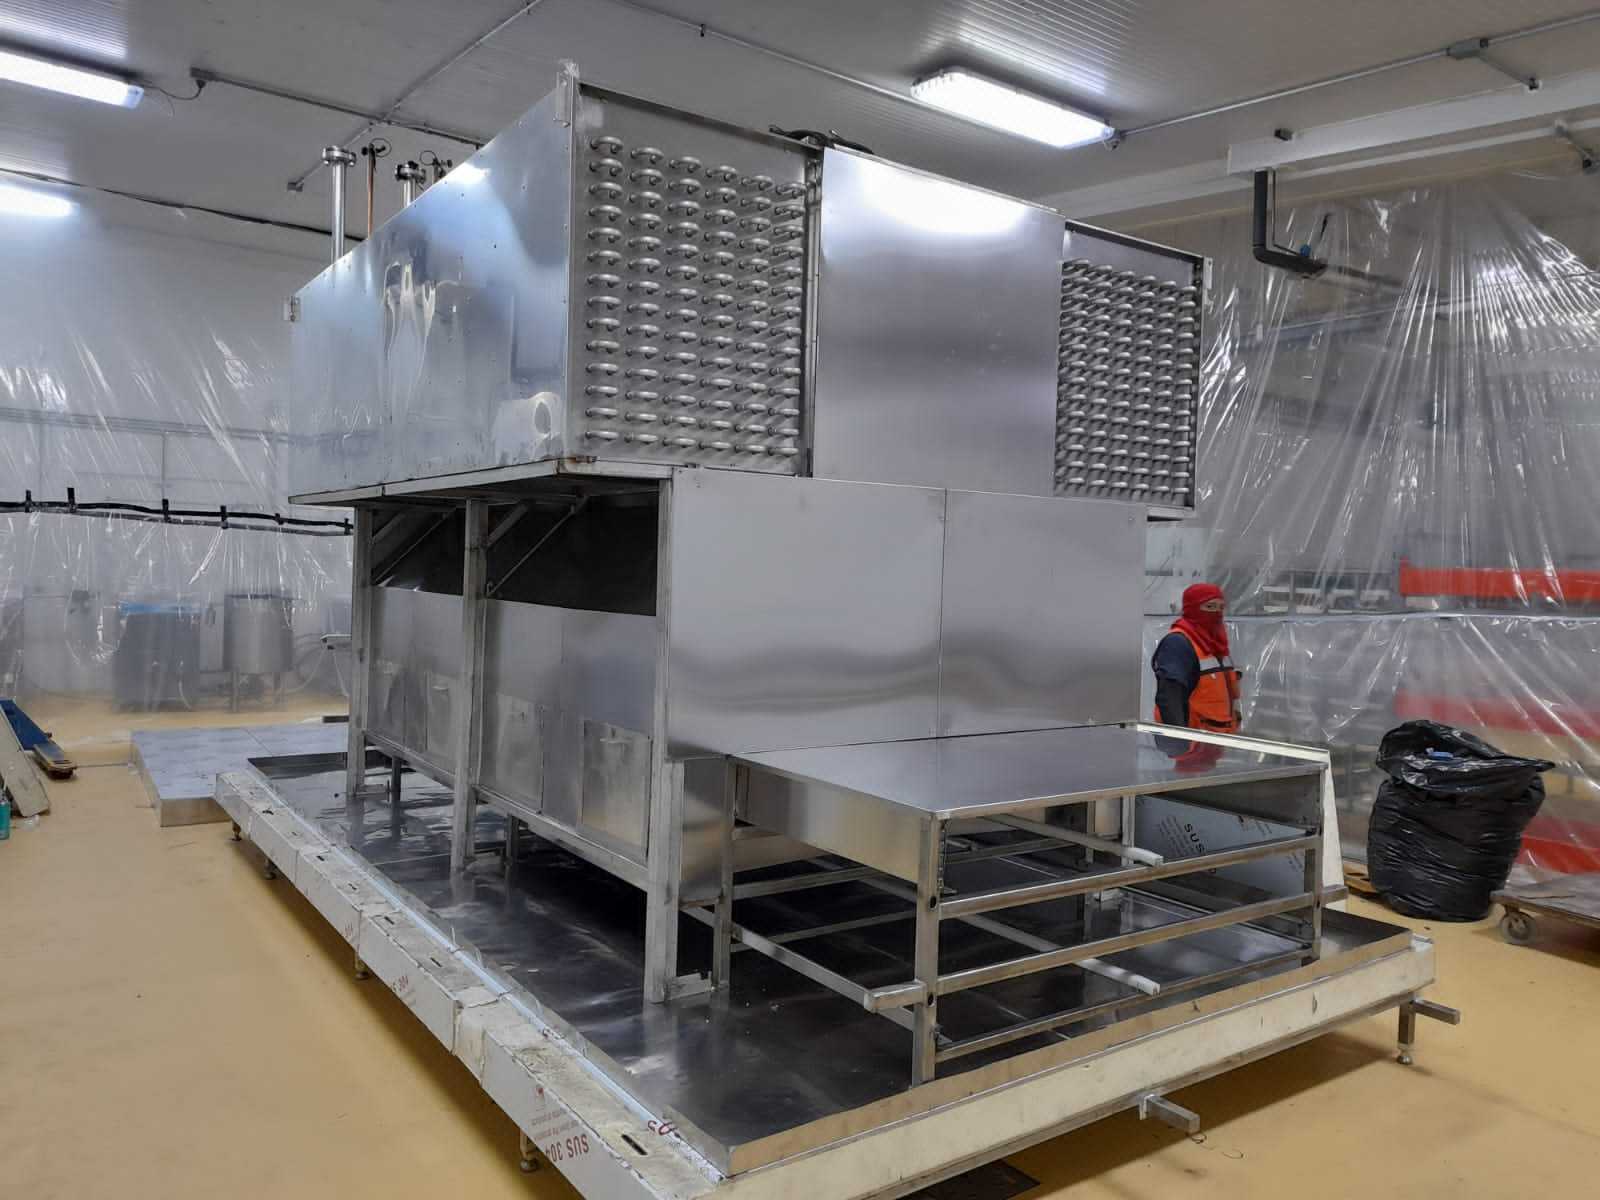 The development prospect of prepared food and the indispensable role of impact quick-freezers in the development of prepared food industry